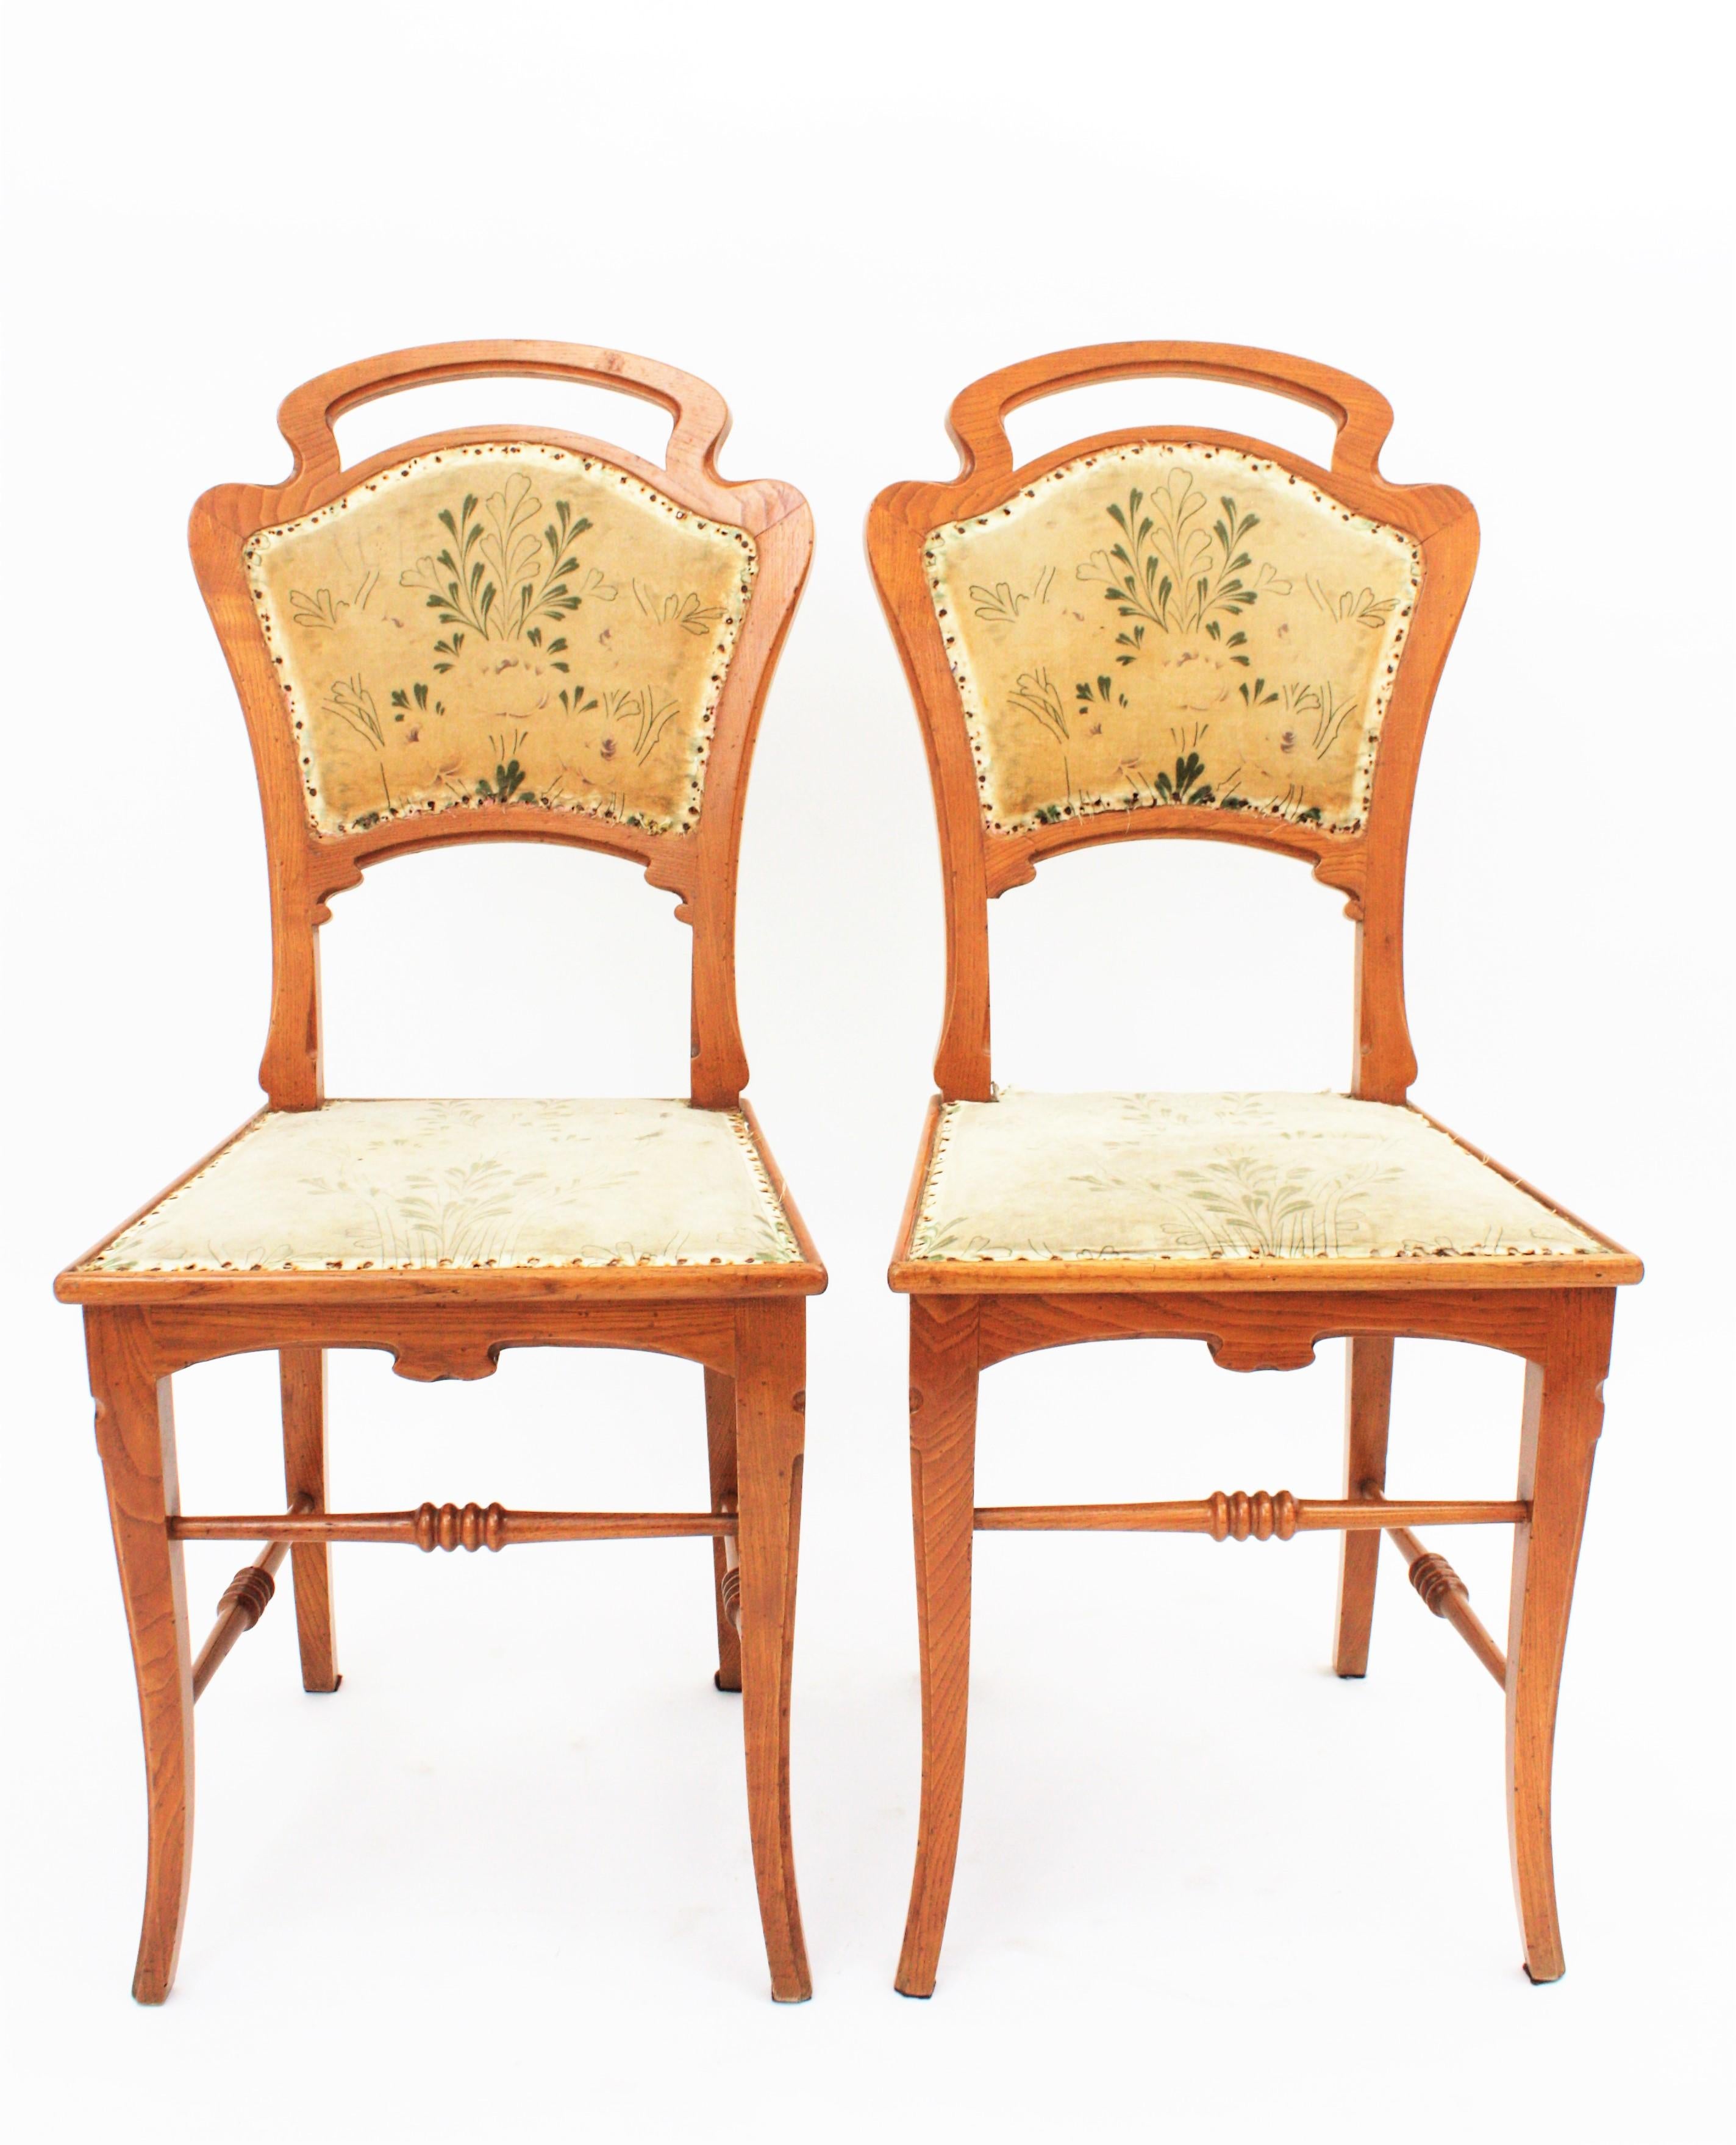 A pair of Art Nouveau chairs made of carved ashwood and upholstered with their original floral velvet fabric. These stylish hand carved chairs were made in Spain in the style of the Master Antoni Gaudí.
Barcelona, 1910-1920s.